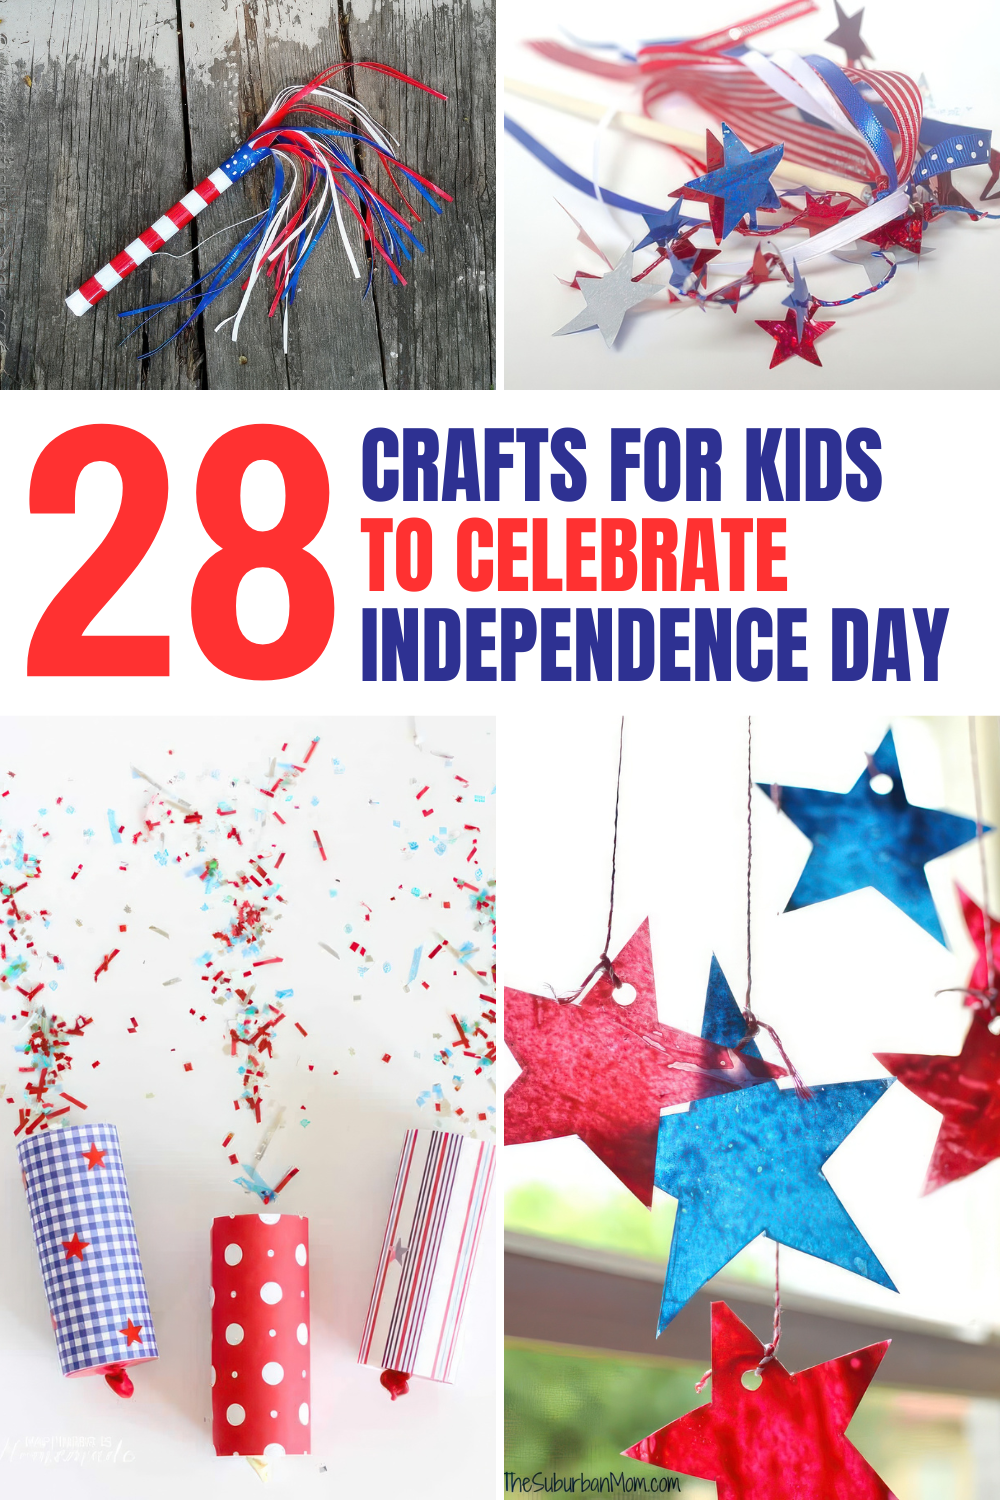 Celebrate the 4th of July with these adorable and simple DIY crafts! Perfect for kids, these red, white, and blue projects will add a patriotic touch to your festivities. Tap to discover all the fun ideas and let the crafting begin! 🇺🇸✨